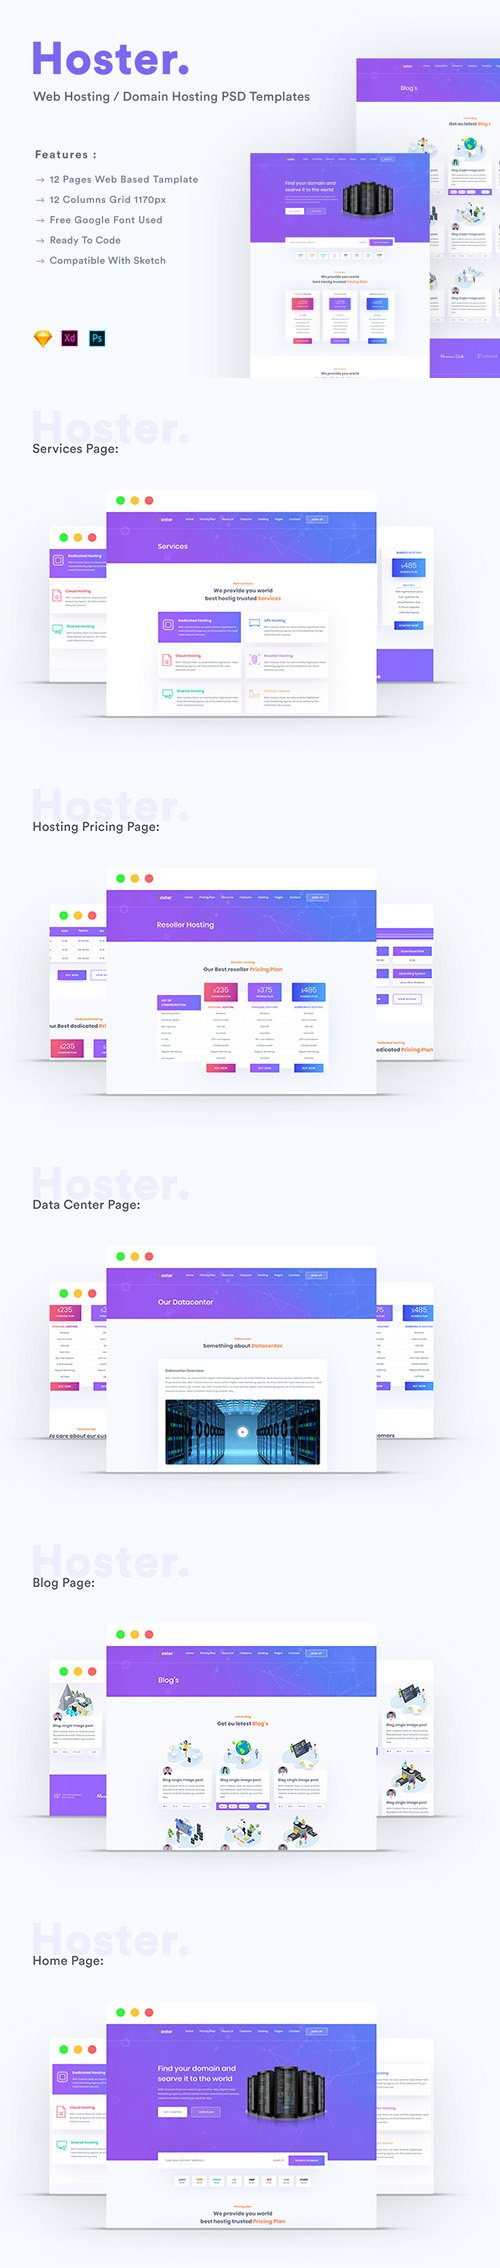 Hoster - Domain Hosting Business PSD Templates